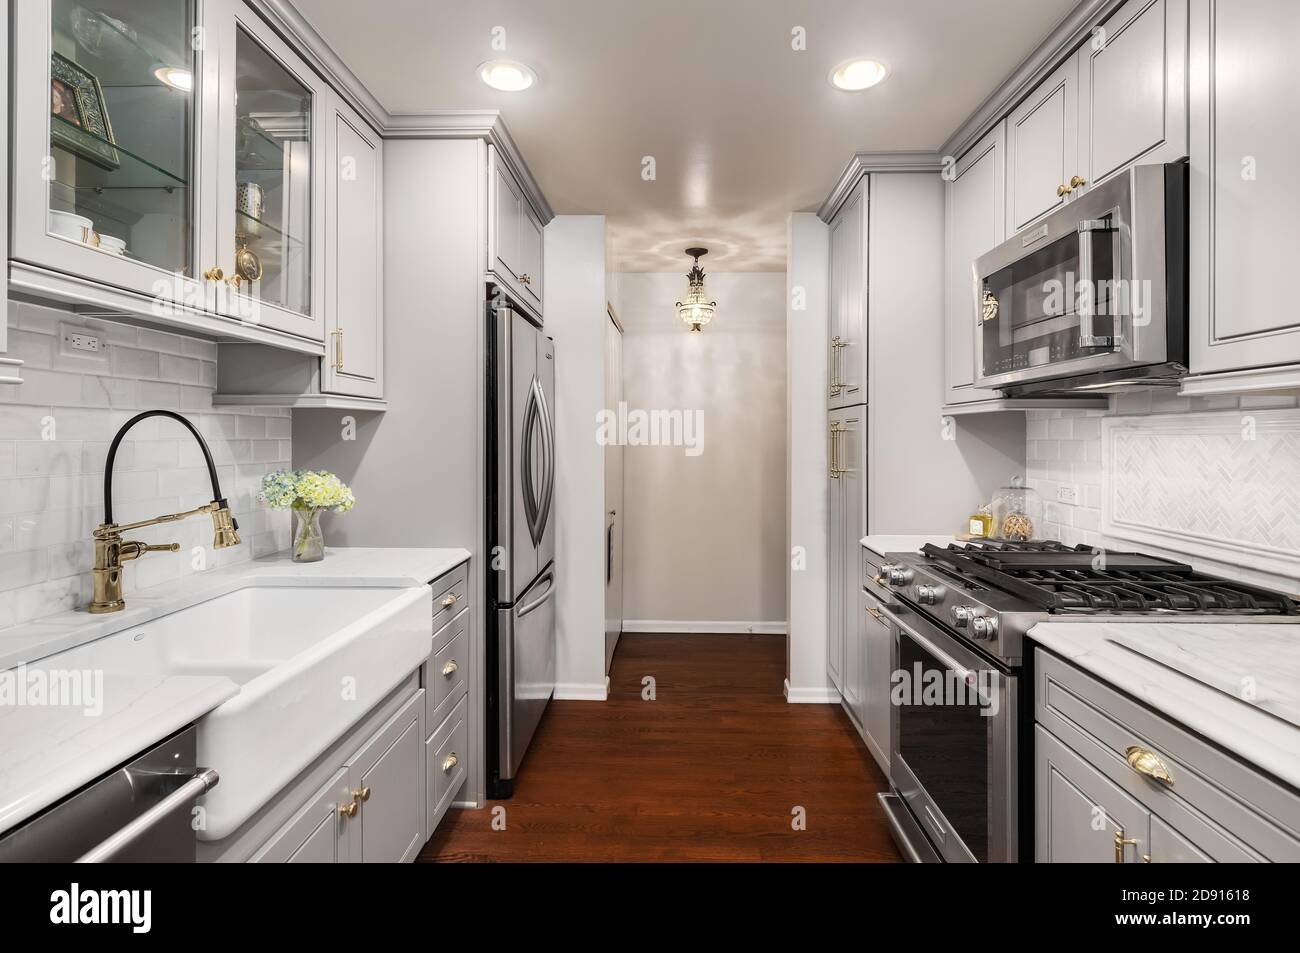 A renovated with kitchen with grey cabinets, gold hardware / faucet,  hardwood floors, and a small chandelier hanging from the ceiling Stock  Photo - Alamy